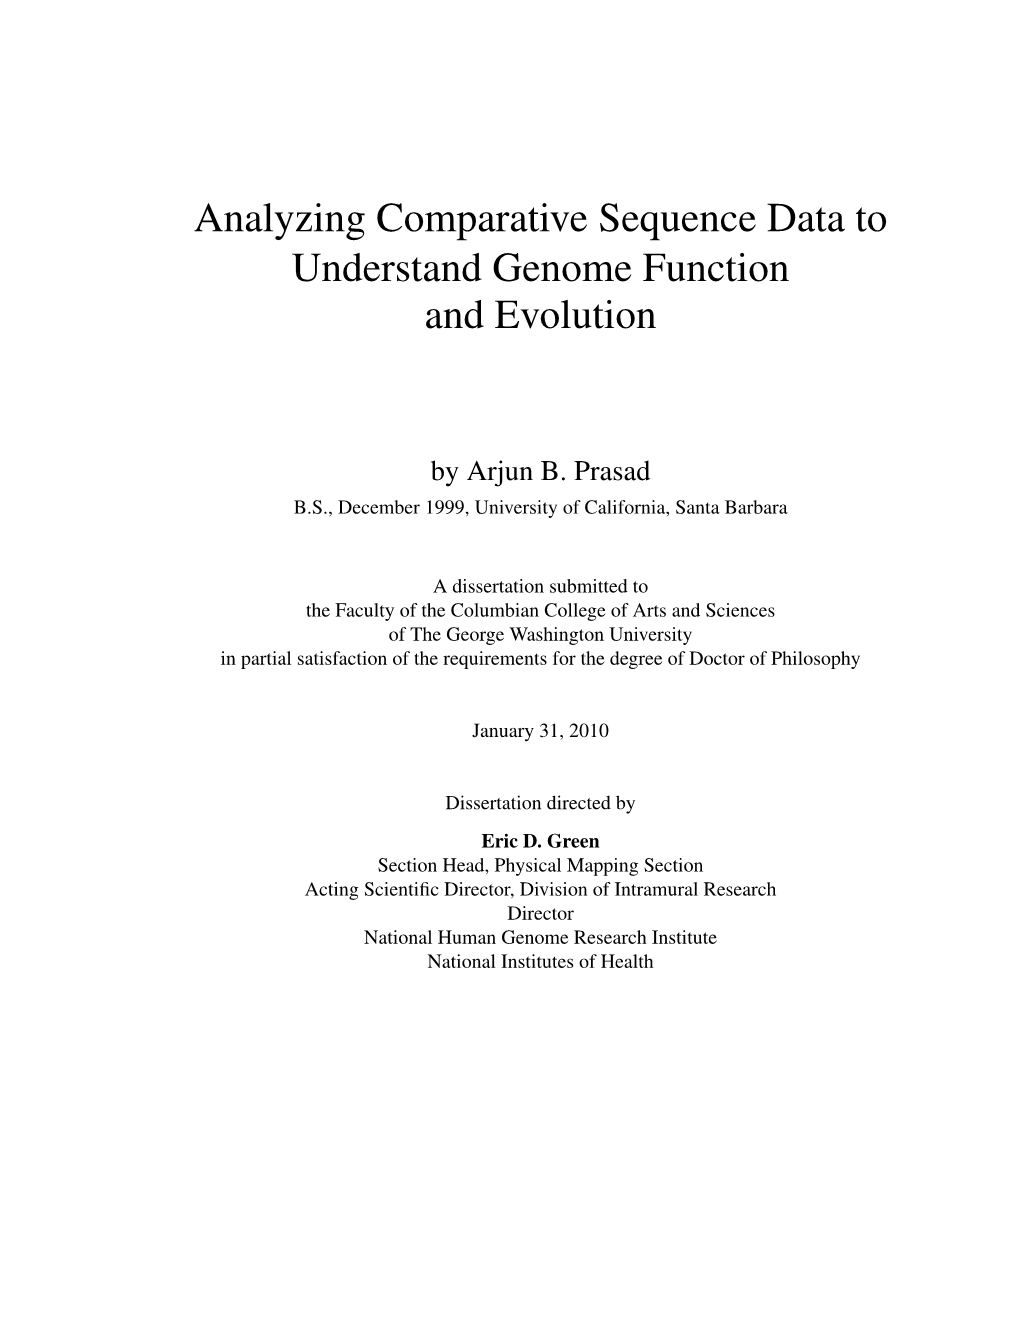 Analyzing Comparative Sequence Data to Understand Genome Function and Evolution